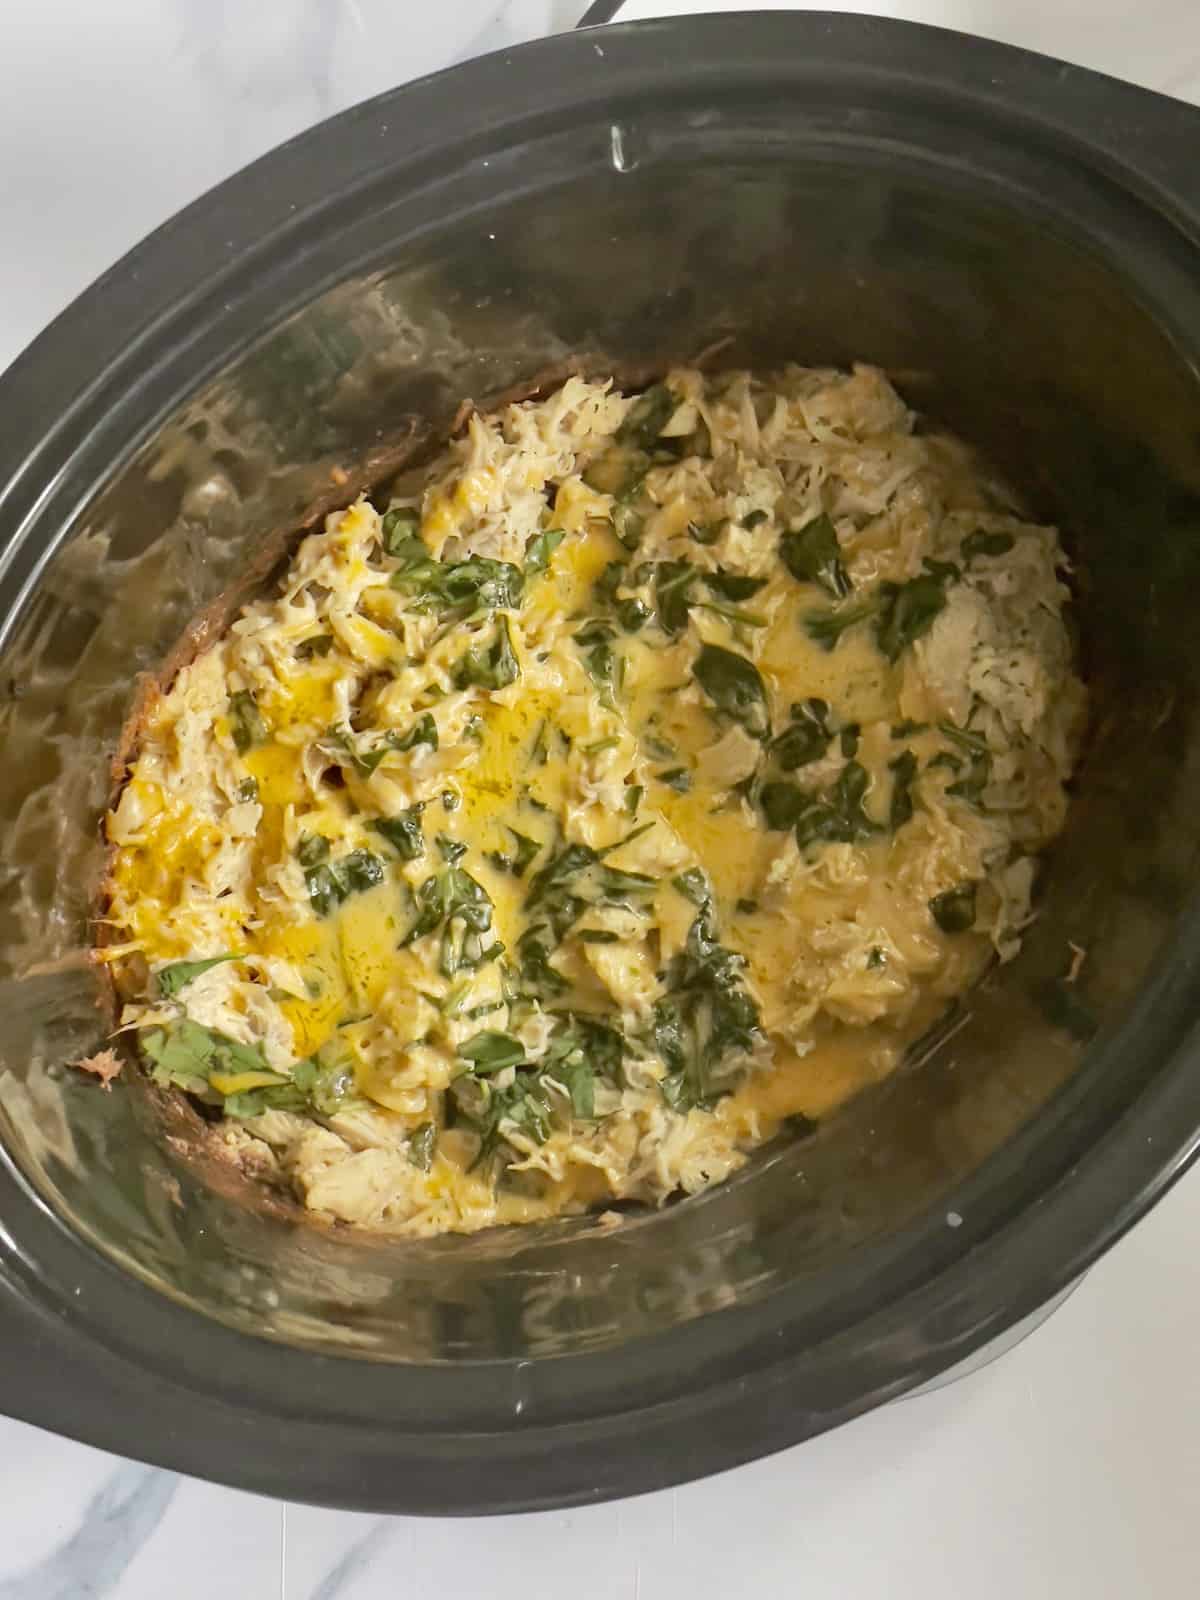 shredded chicken in a crockpot topped with spinach, scallions and cheddar cheese